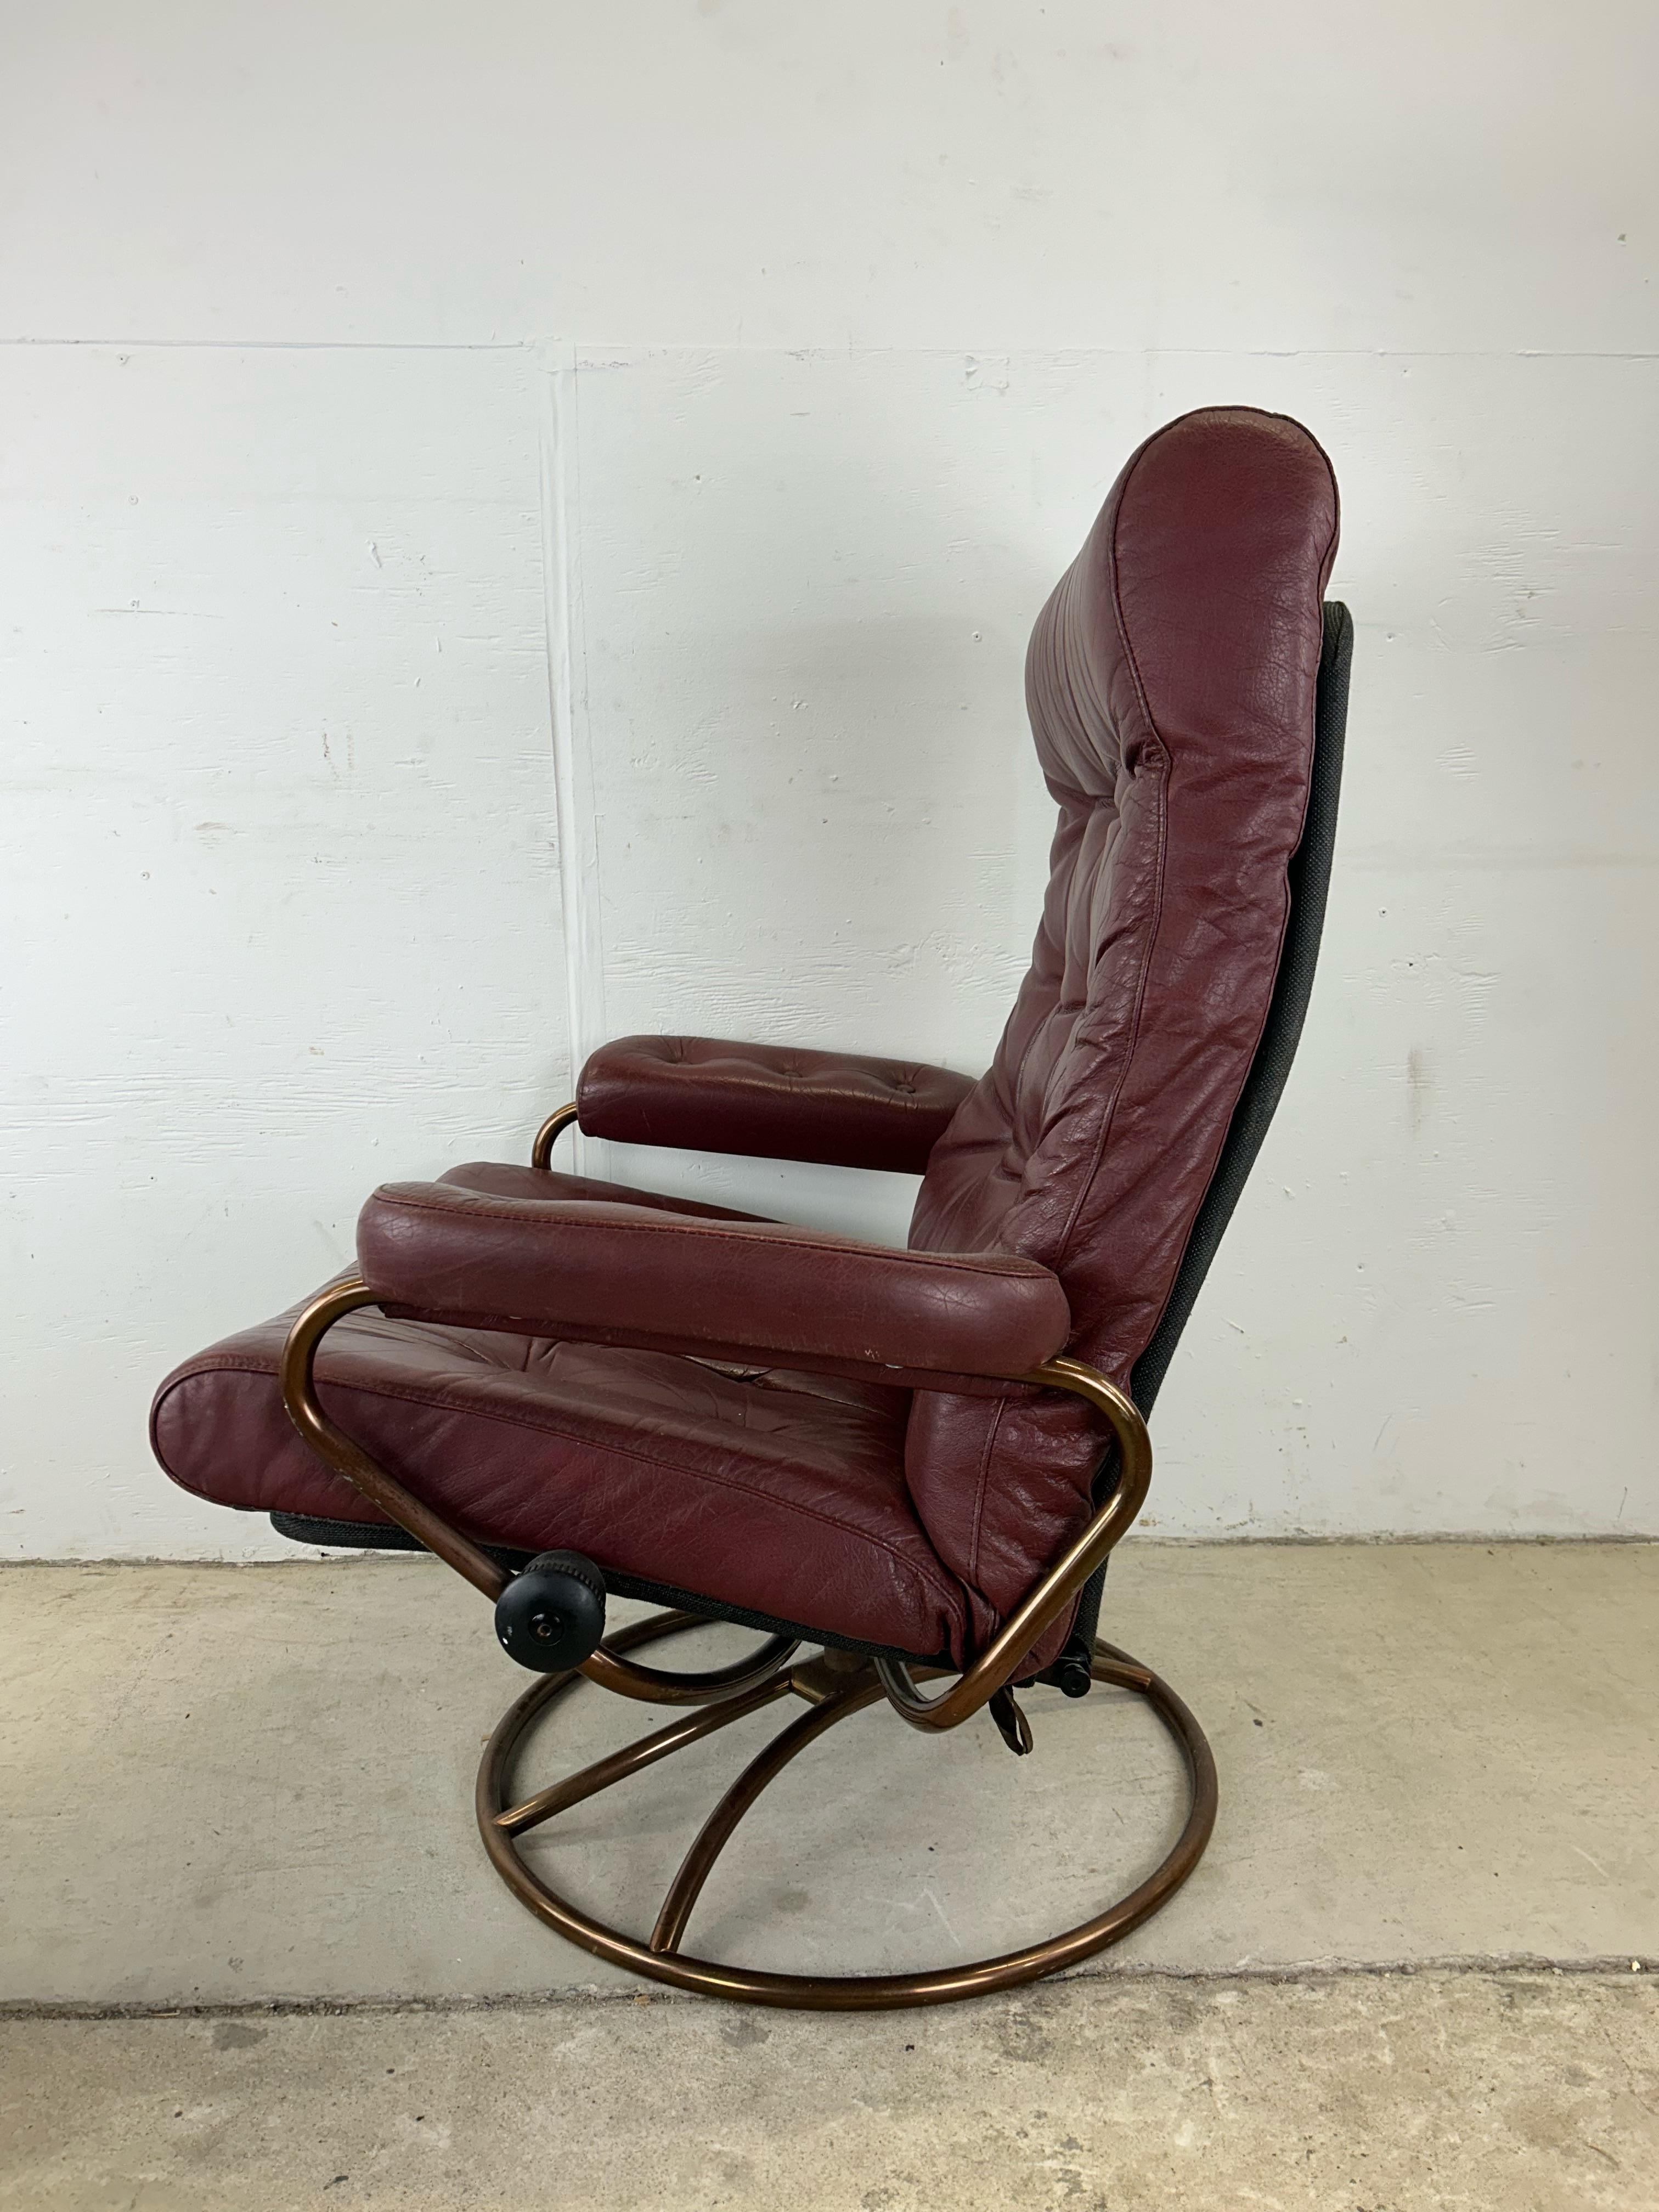 Scandinavian Modern Red Leather Ekornes Stressless Recliner with Ottoman For Sale 9